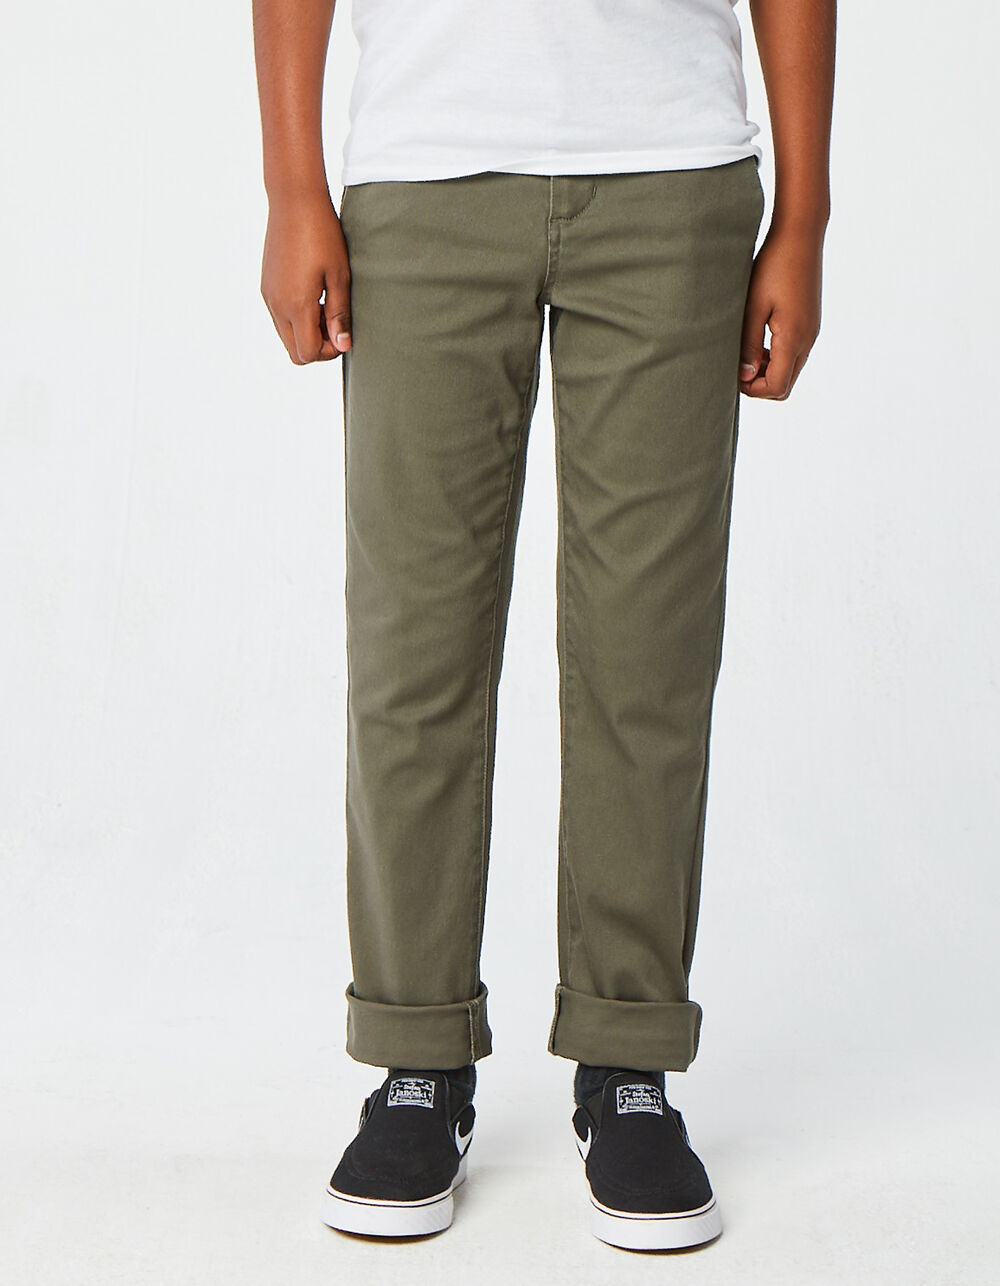 RSQ London Boys Ivy Skinny Stretch Chino Pants image number 1